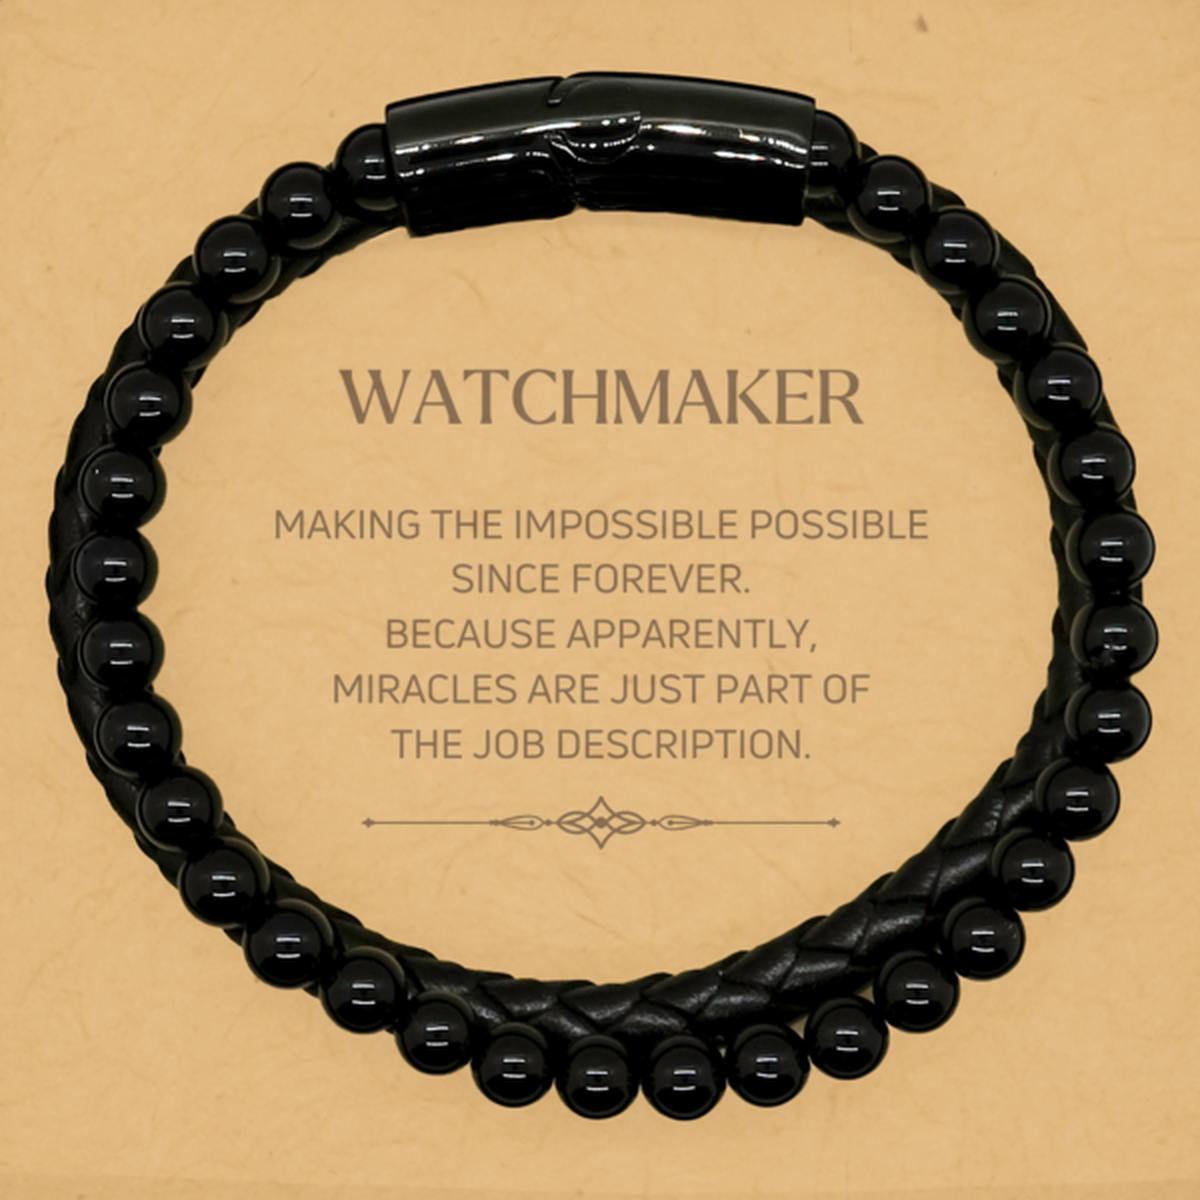 Funny Watchmaker Gifts, Miracles are just part of the job description, Inspirational Birthday Stone Leather Bracelets For Watchmaker, Men, Women, Coworkers, Friends, Boss